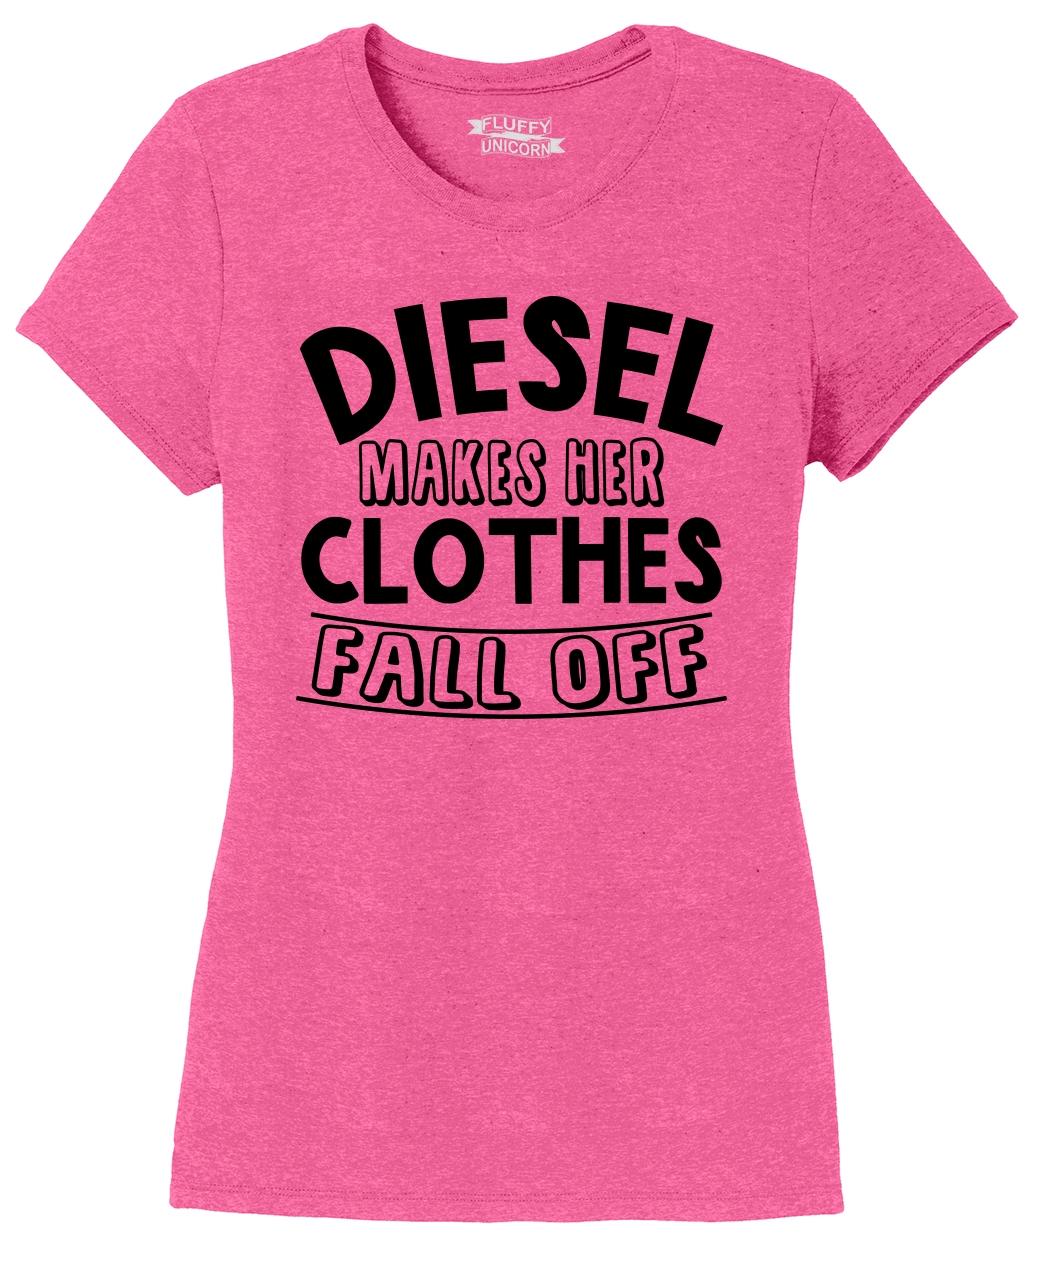 Ladies Diesel Makes Her Clothes Fall Off Tri Blend Tee Truck Sex 